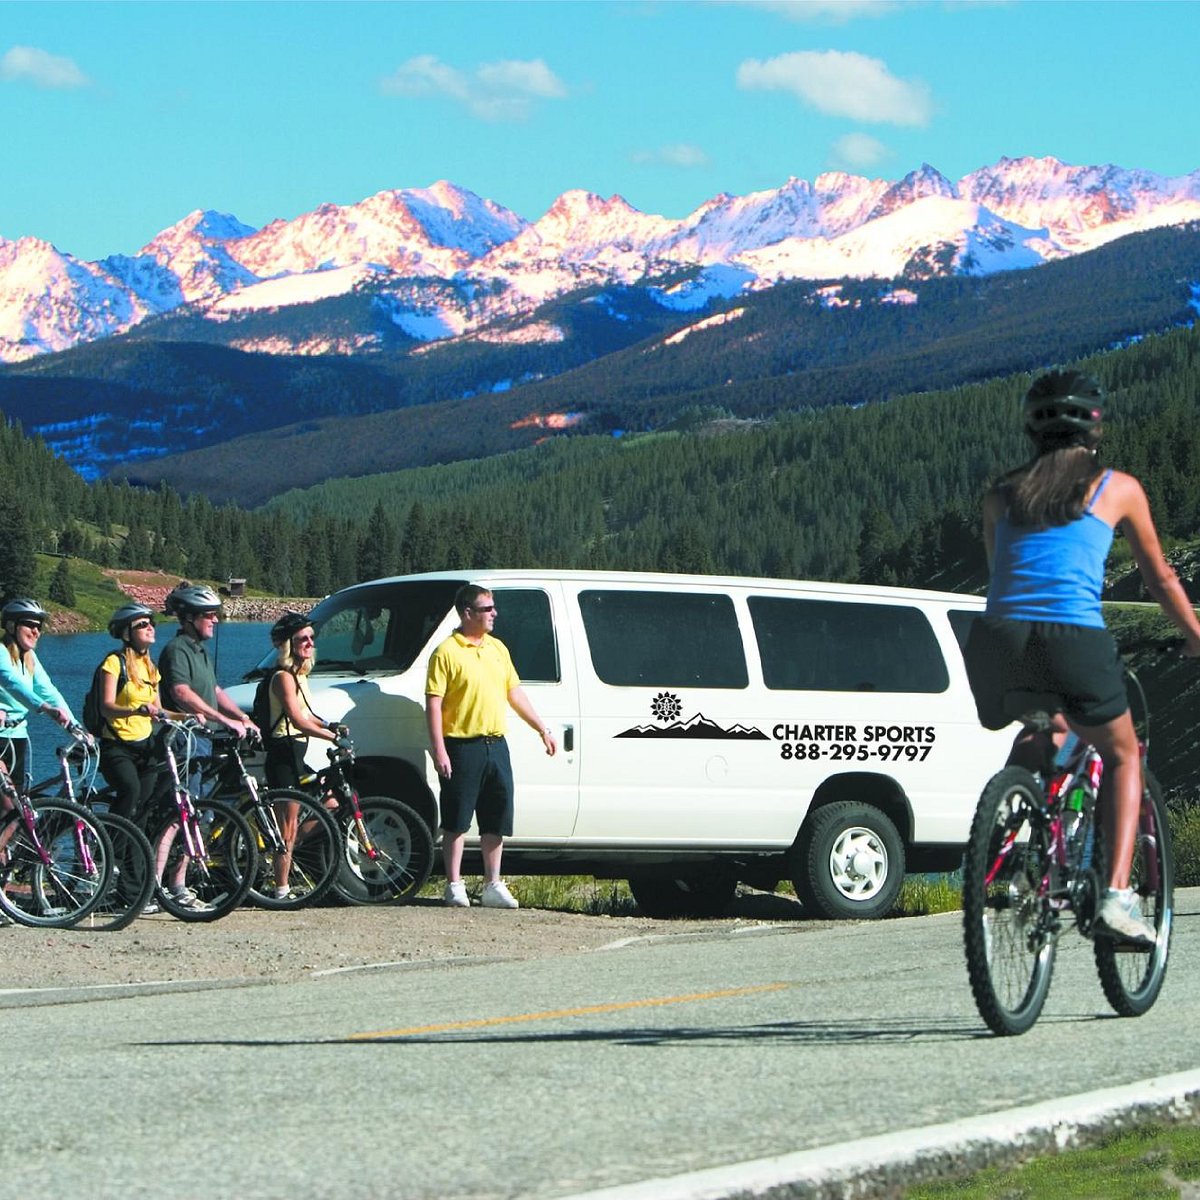 CHARTER SPORTS VAIL PASS BIKE TOUR All You Need to Know BEFORE You Go